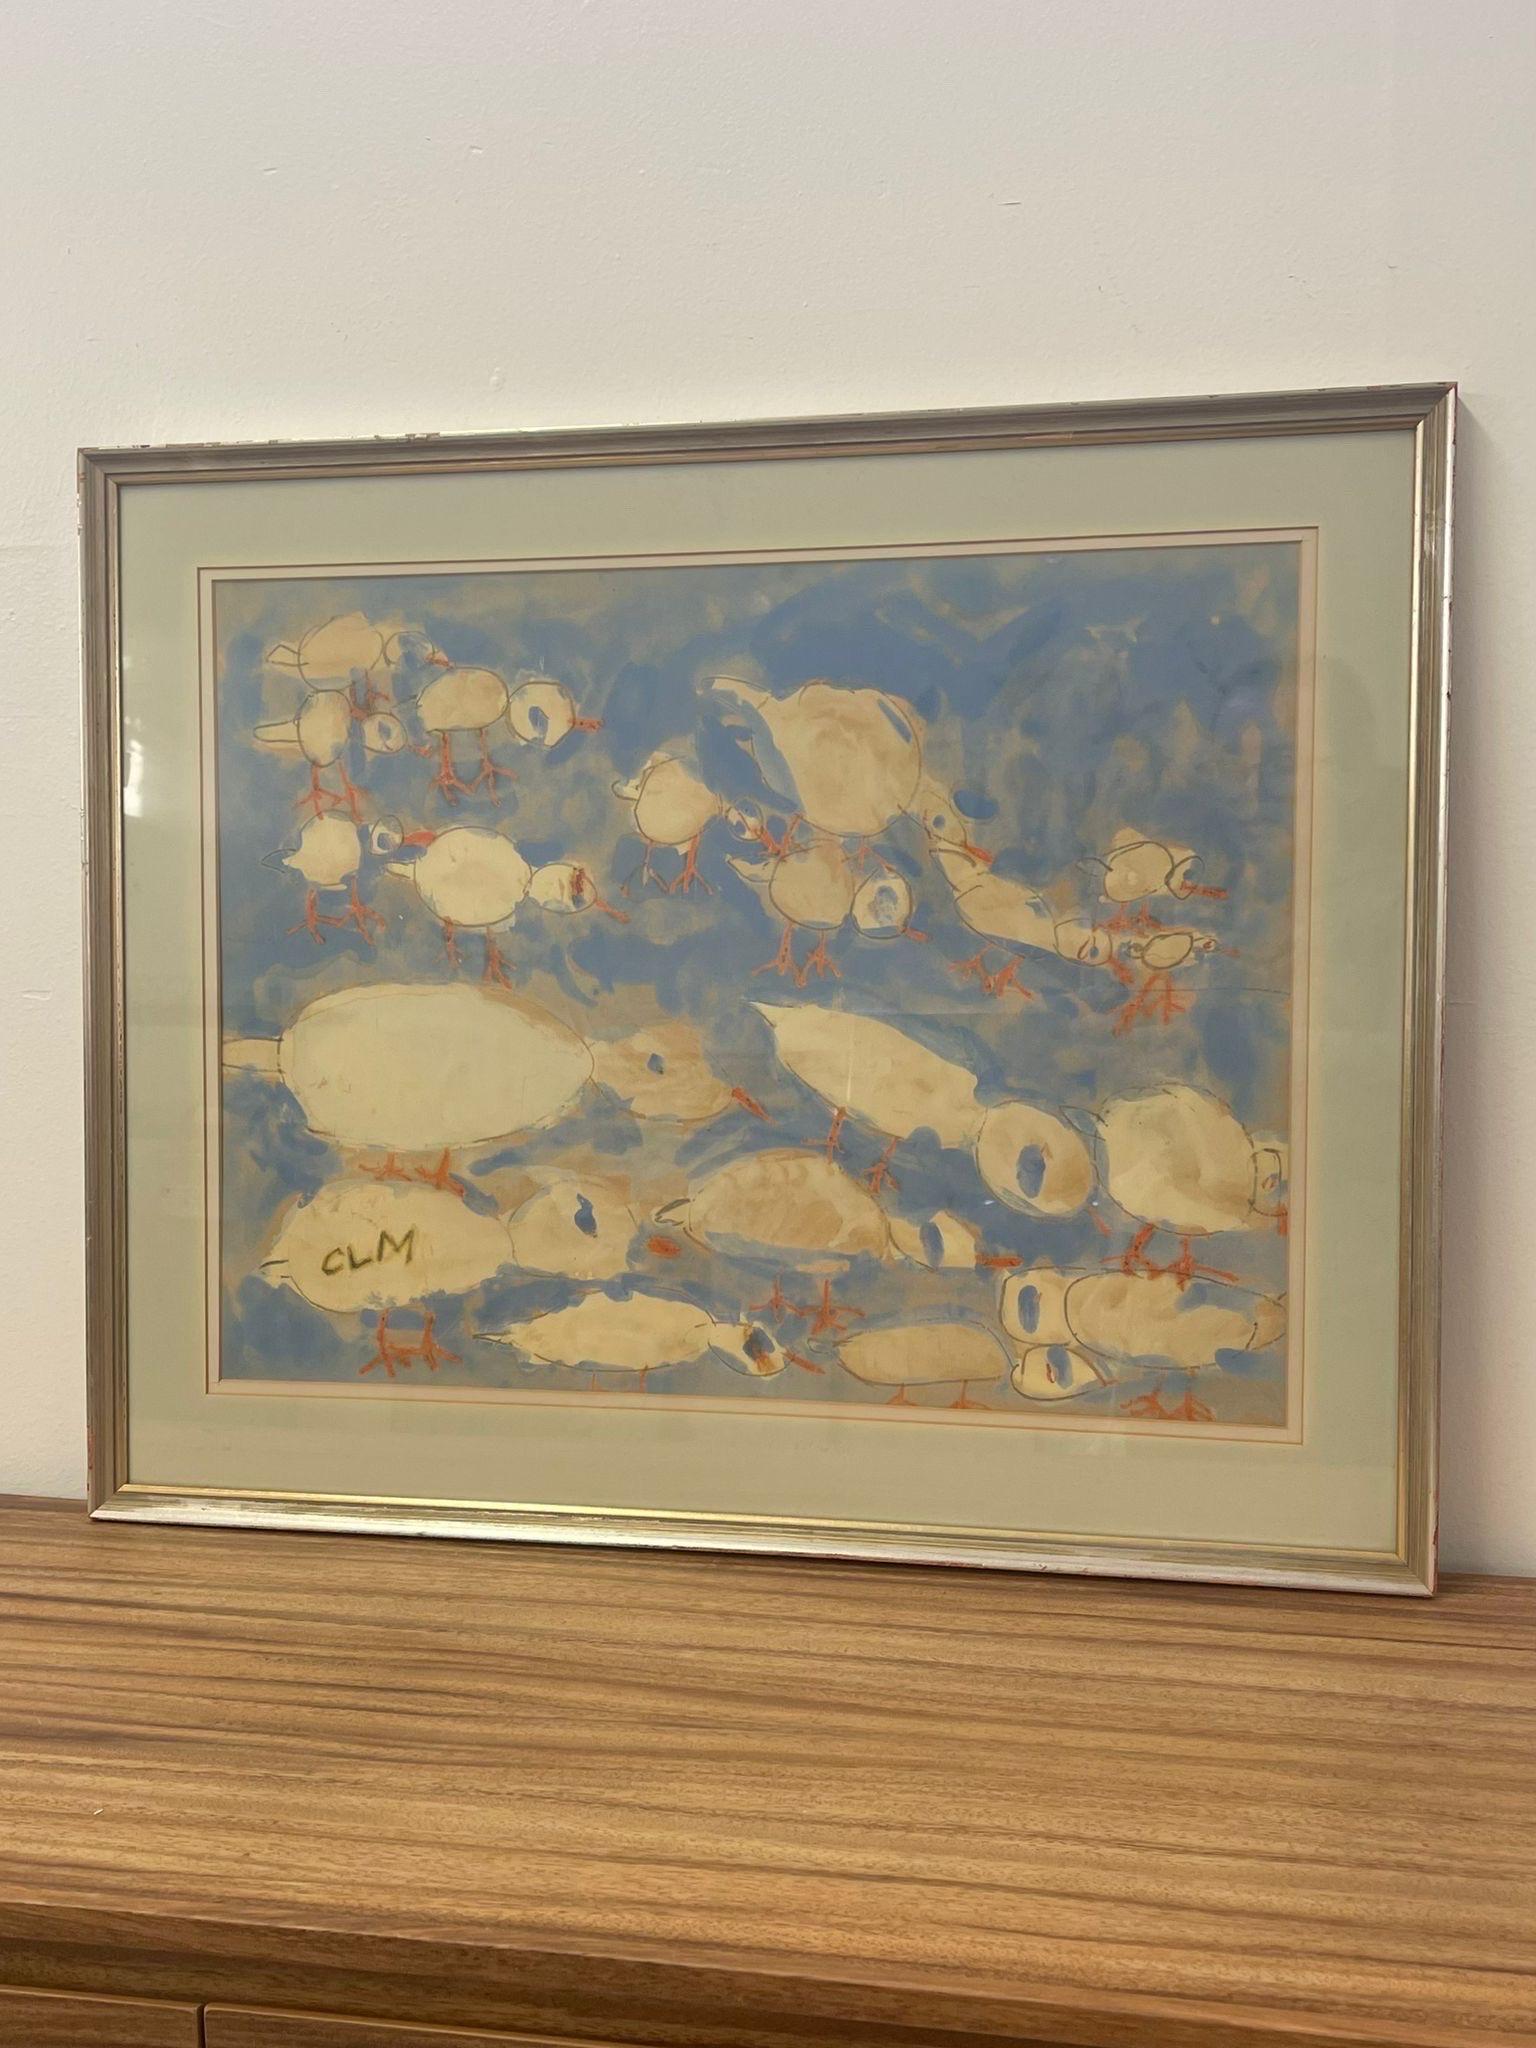 Vintage Illustration of a Group of Ducks. Possibly Pastel. Signed with Initials CLM in Lower Corner. Frame has Makers Mark on the Back dated 1961

Dimensions. 28 W ; 0.50 D ; 23 H